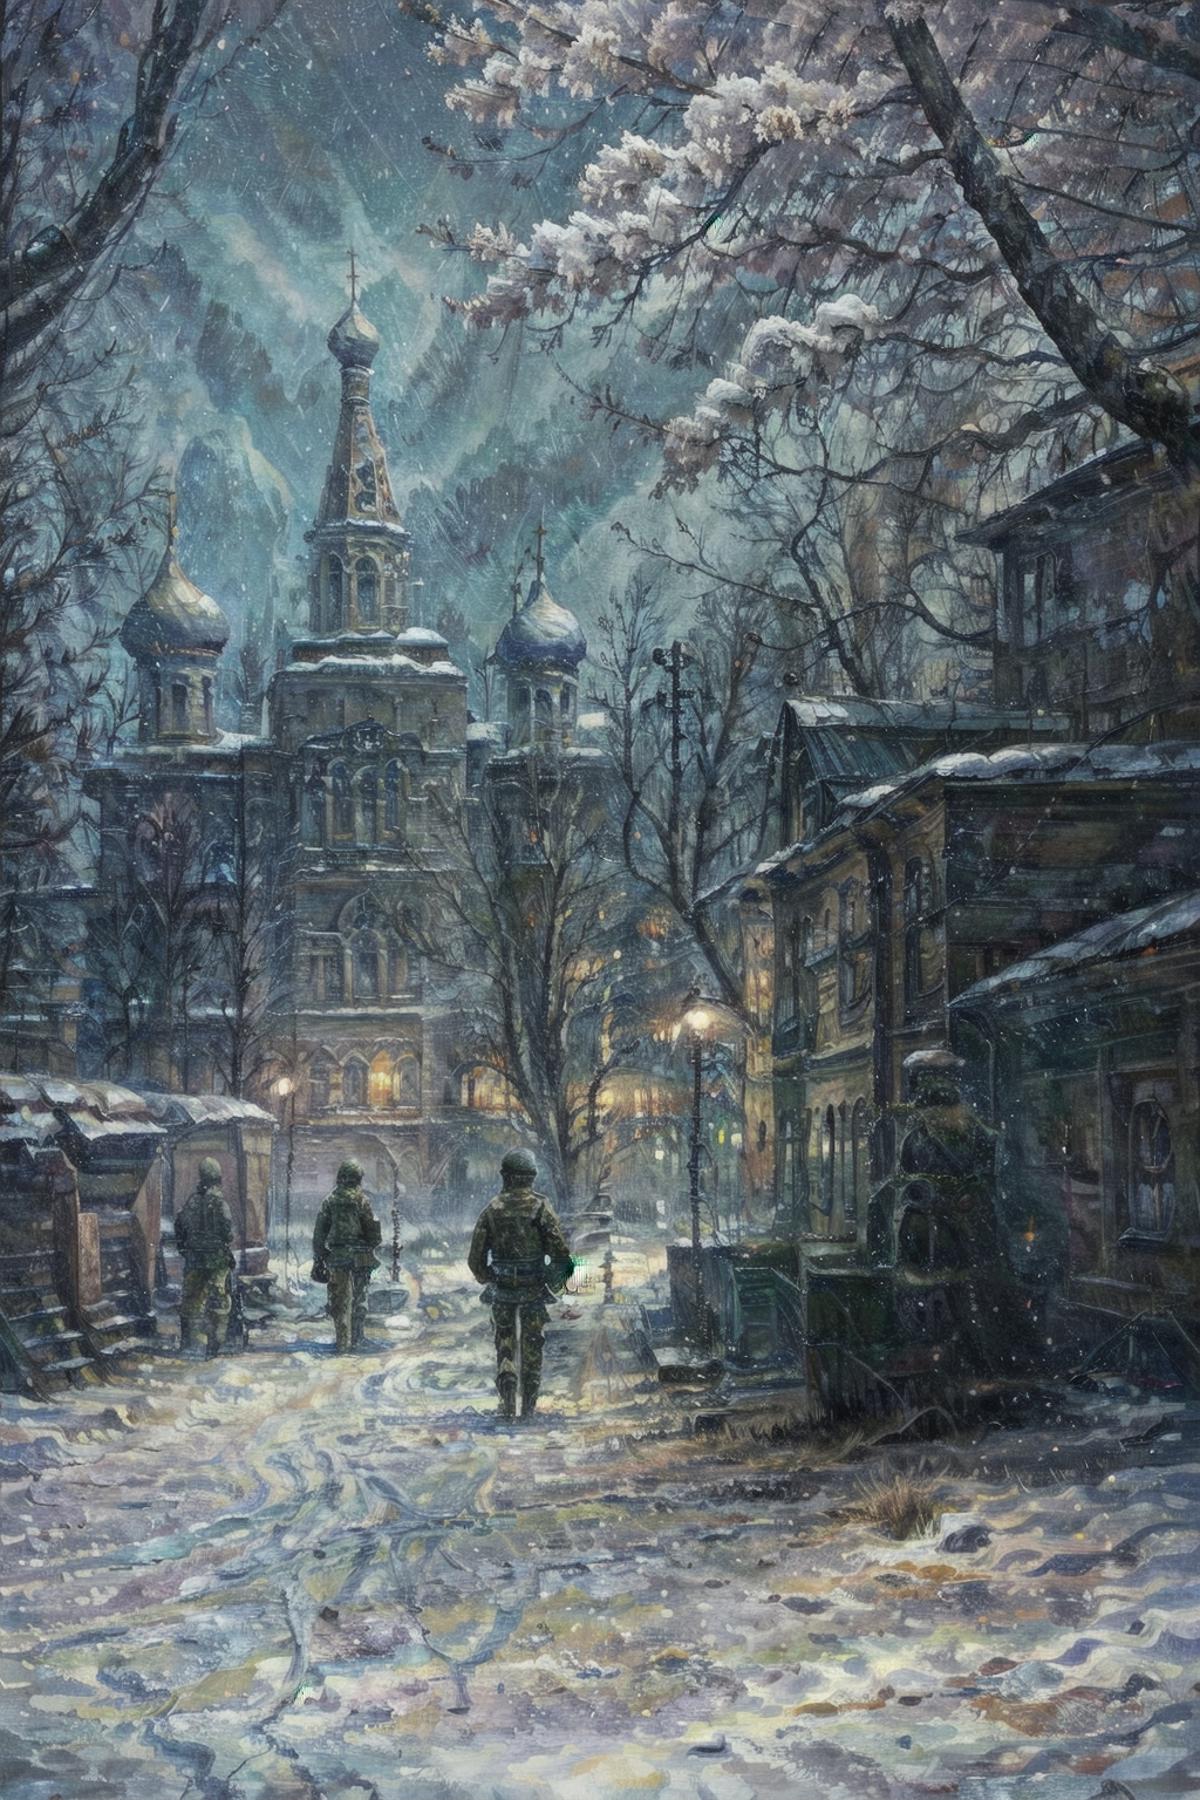 Snowy Town with Three People Walking Down the Street